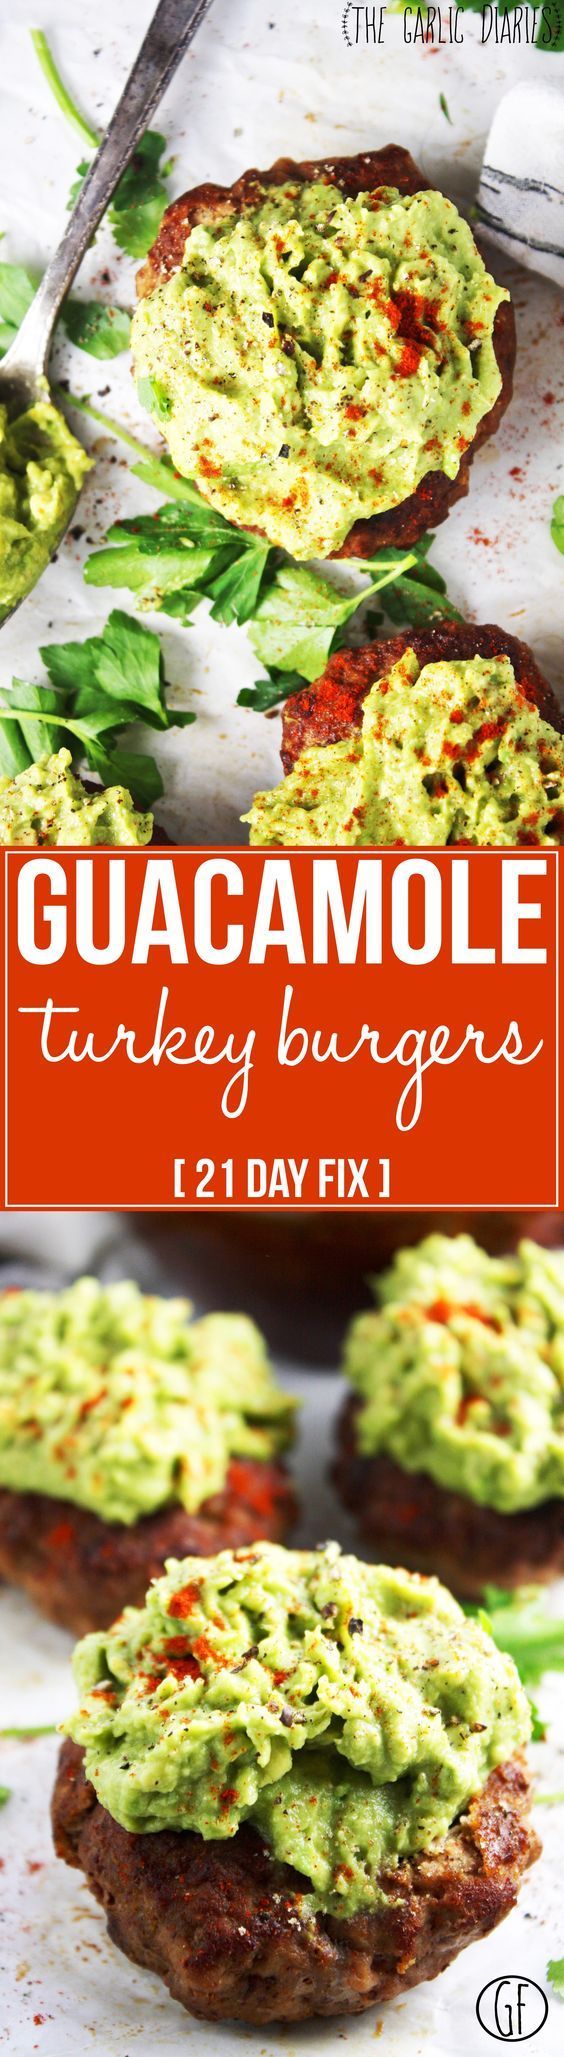 Fix Approved Guacamole Turkey Burgers (1 Red, 1 Blue, 1 Tsp) // 21 Day Fix // fitness // fitspo // wor